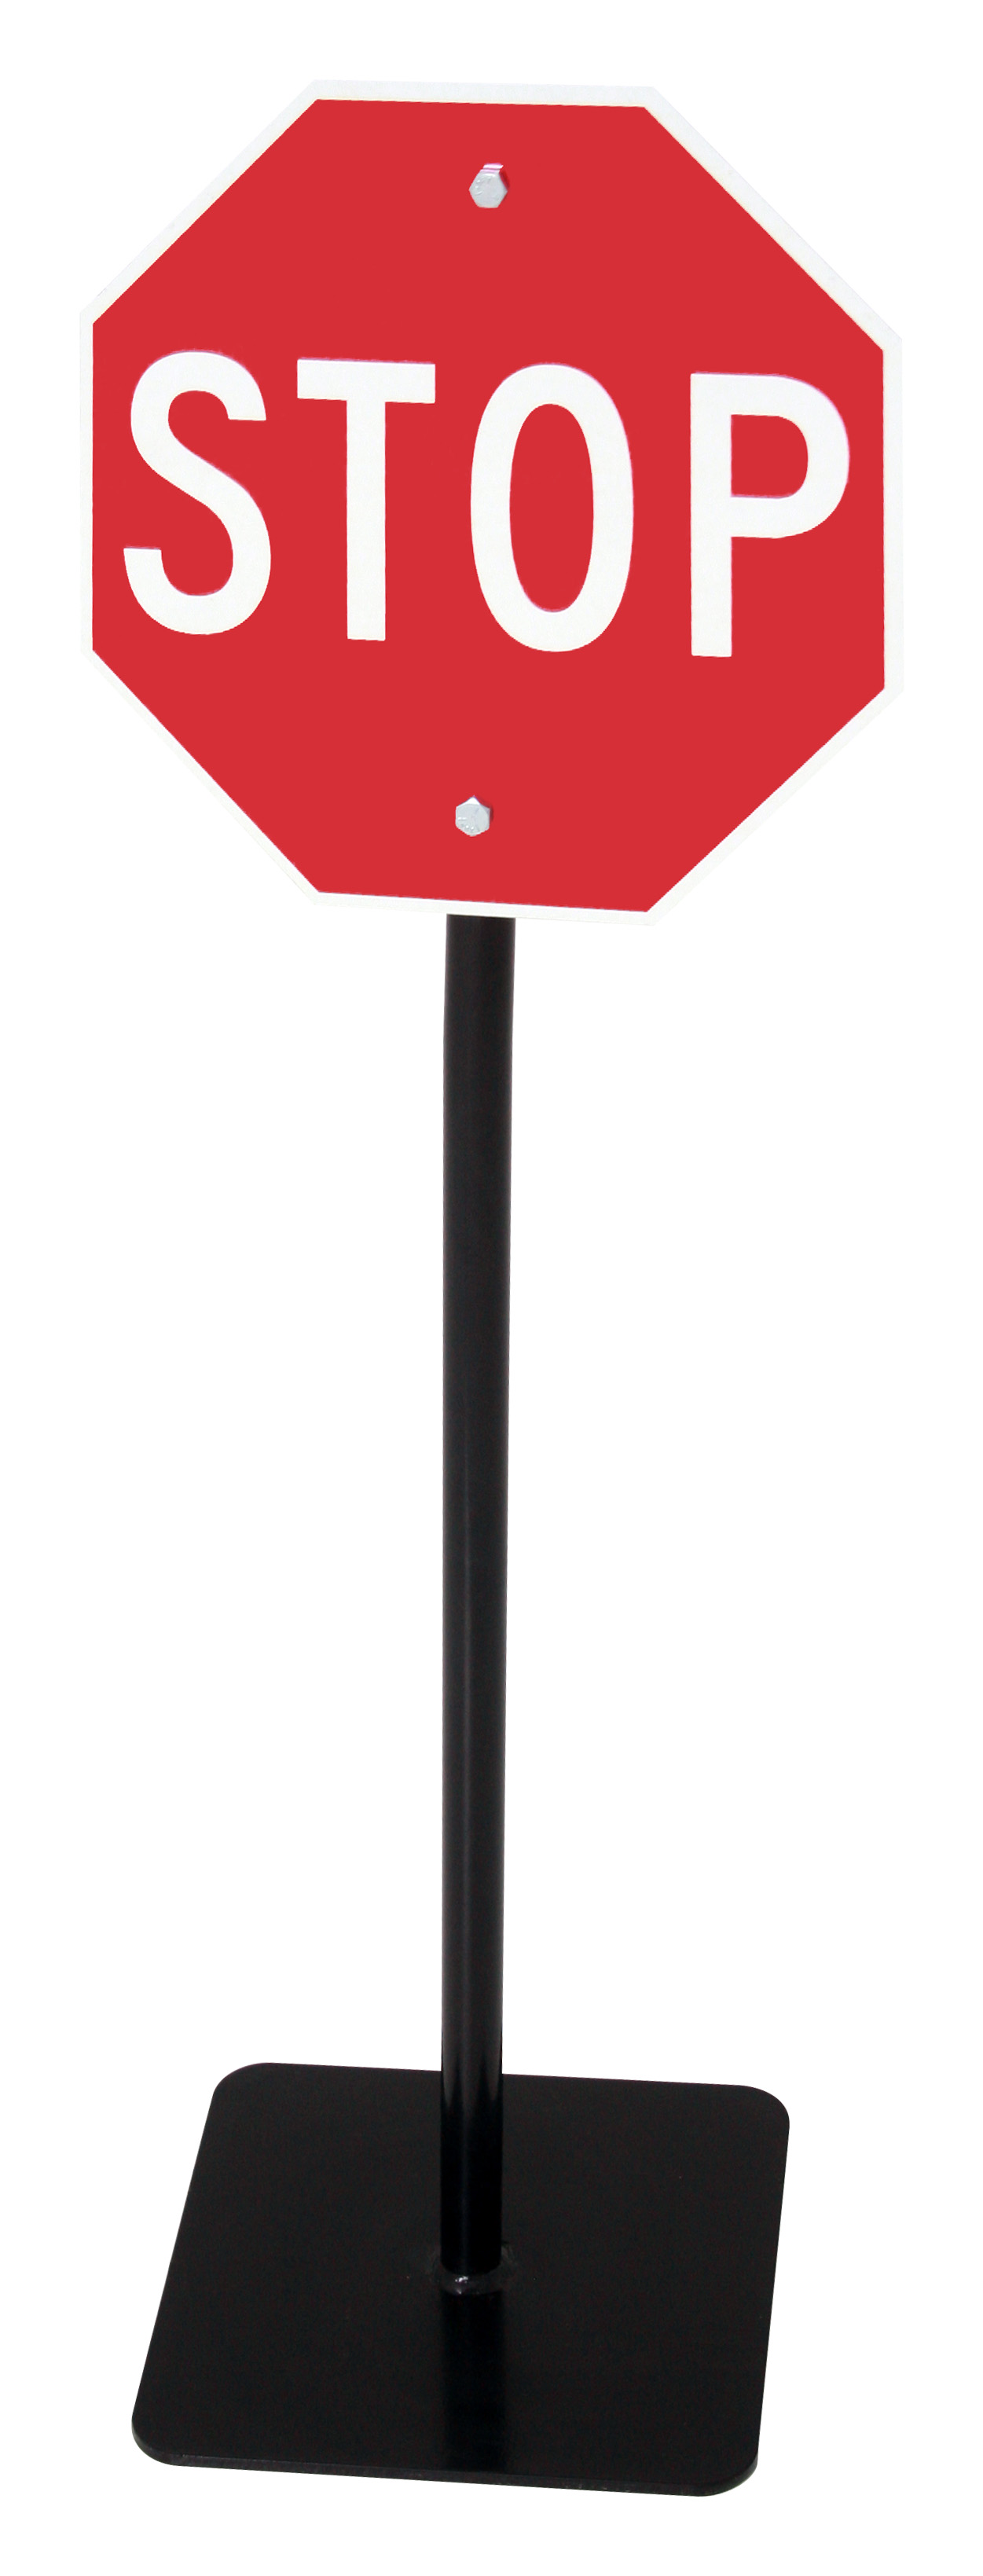 STOP SIGN - Korkat, Inc. Playground Equipment and Site Furnishings ...